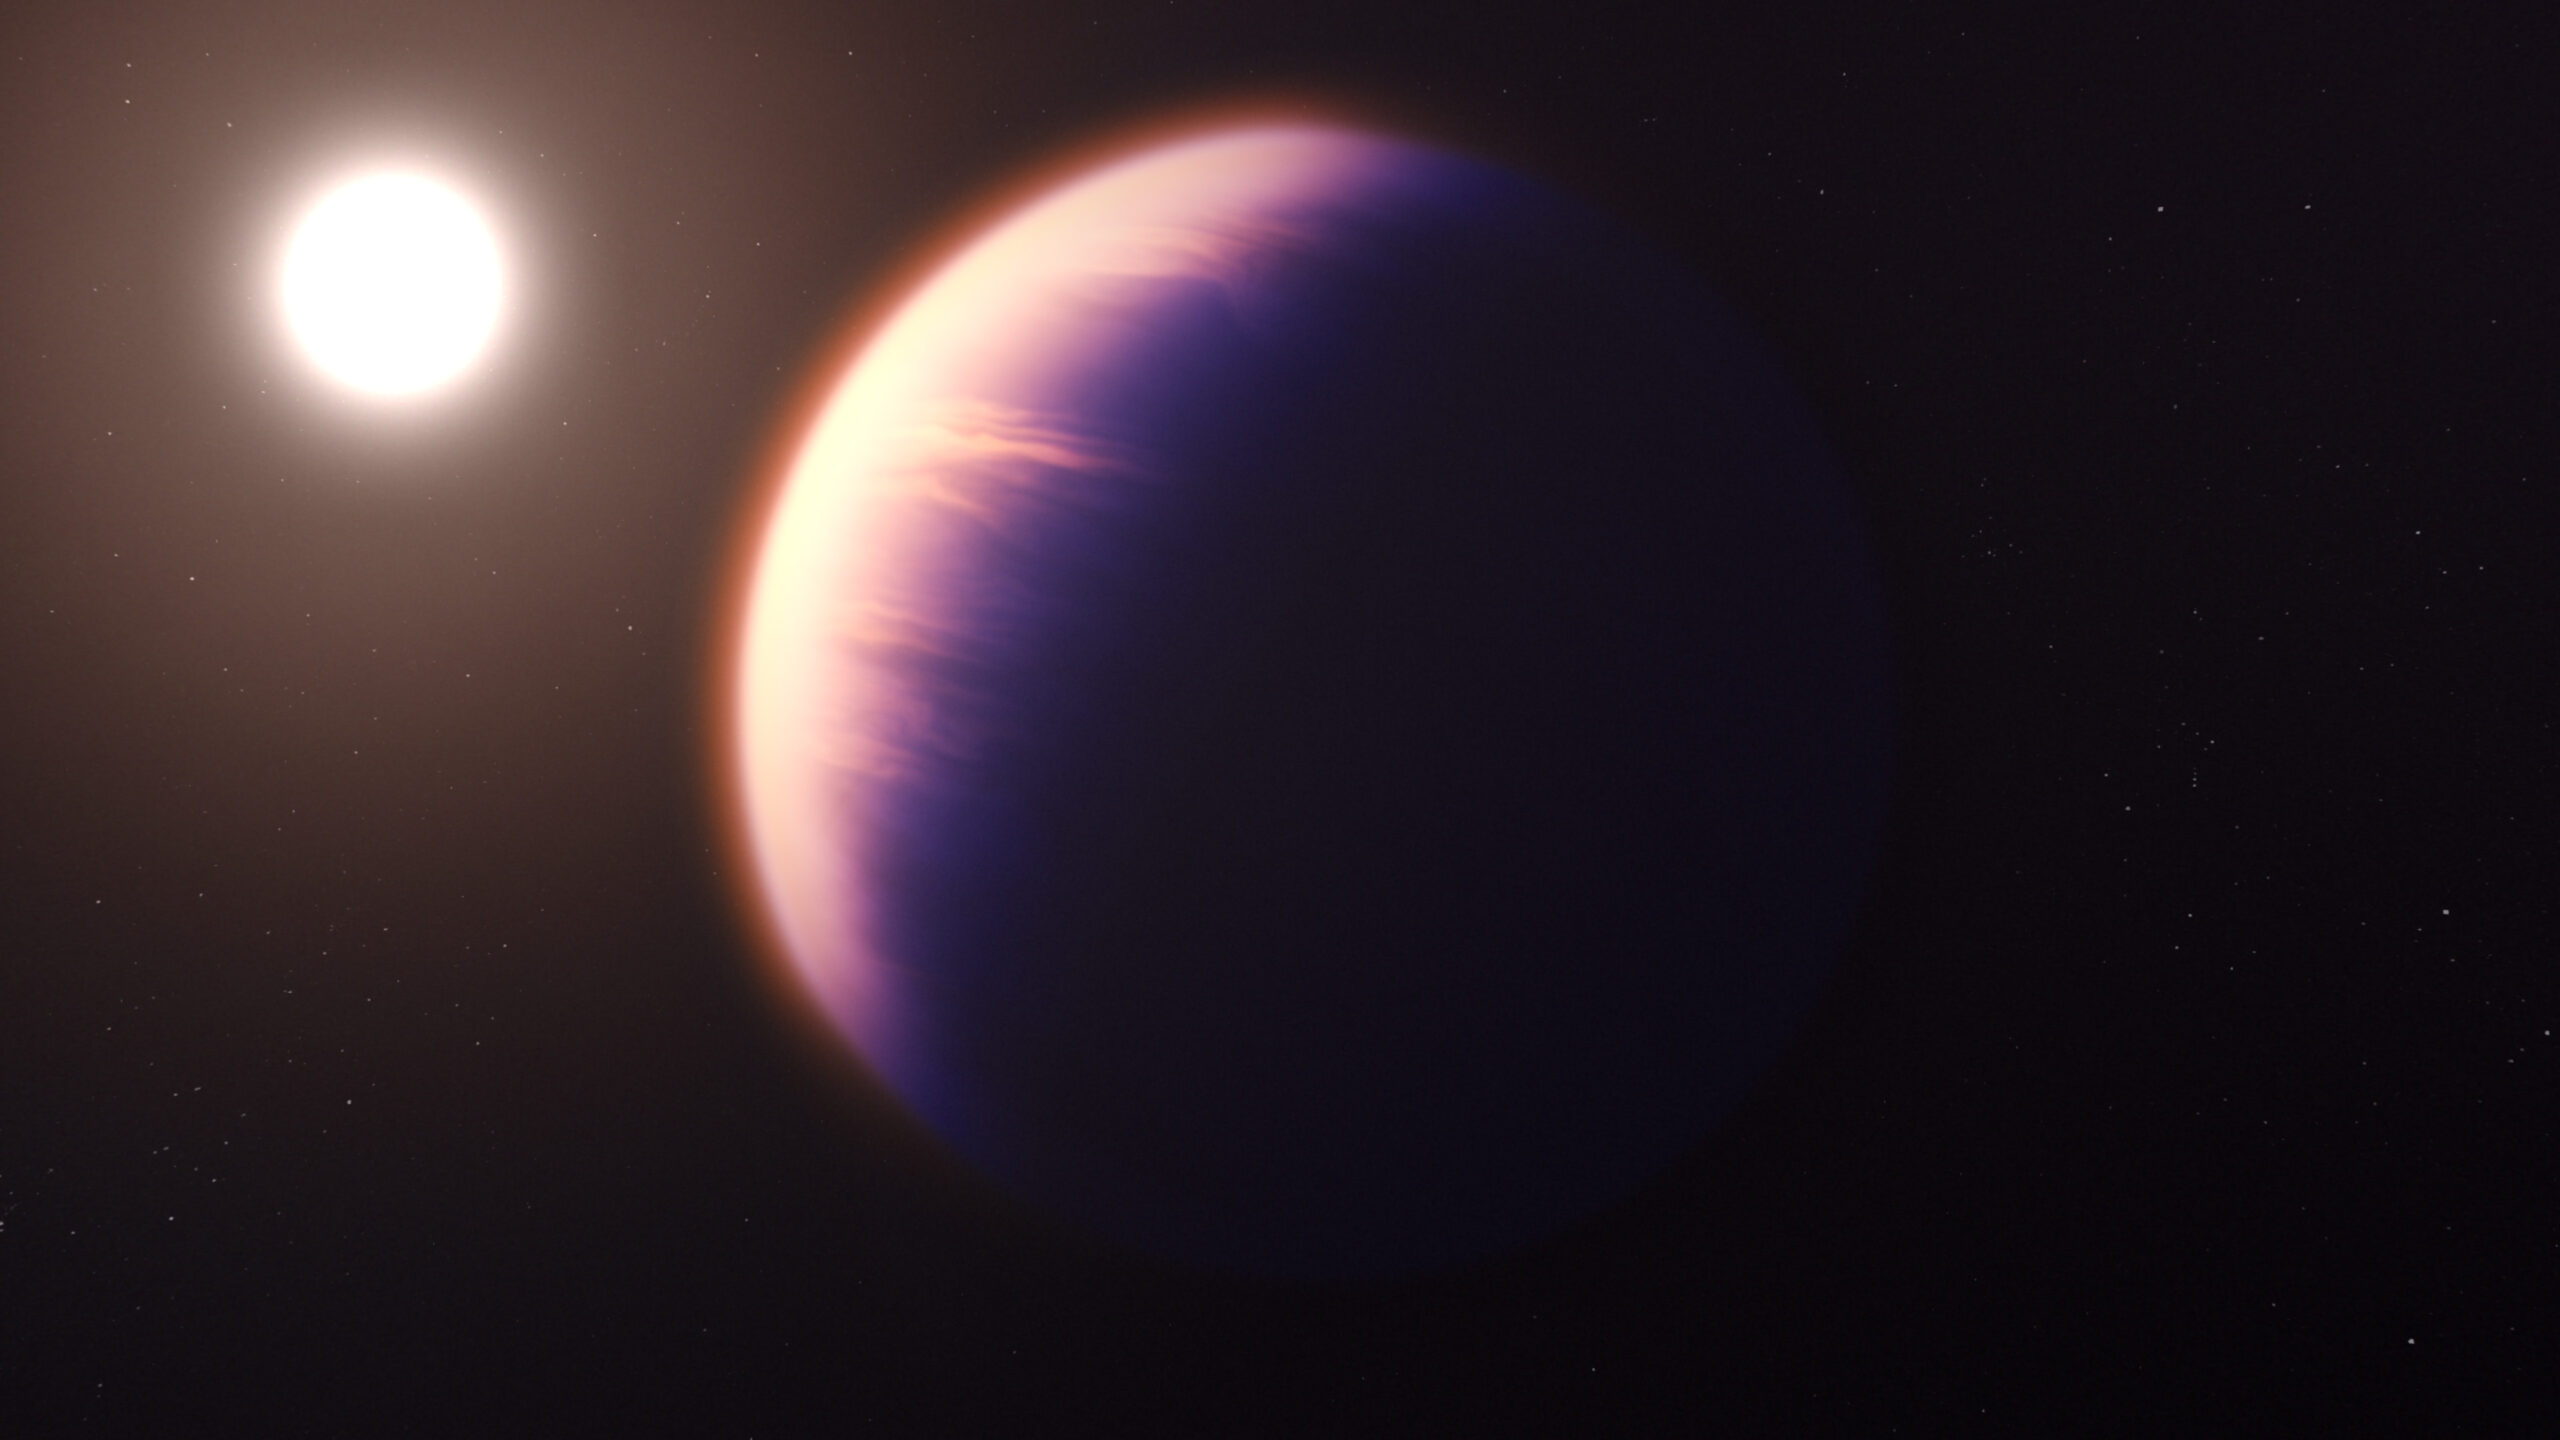 Carbon Dioxide Observed In Exoplanet WASP-39 b’s Atmosphere By James Webb Space Telescope